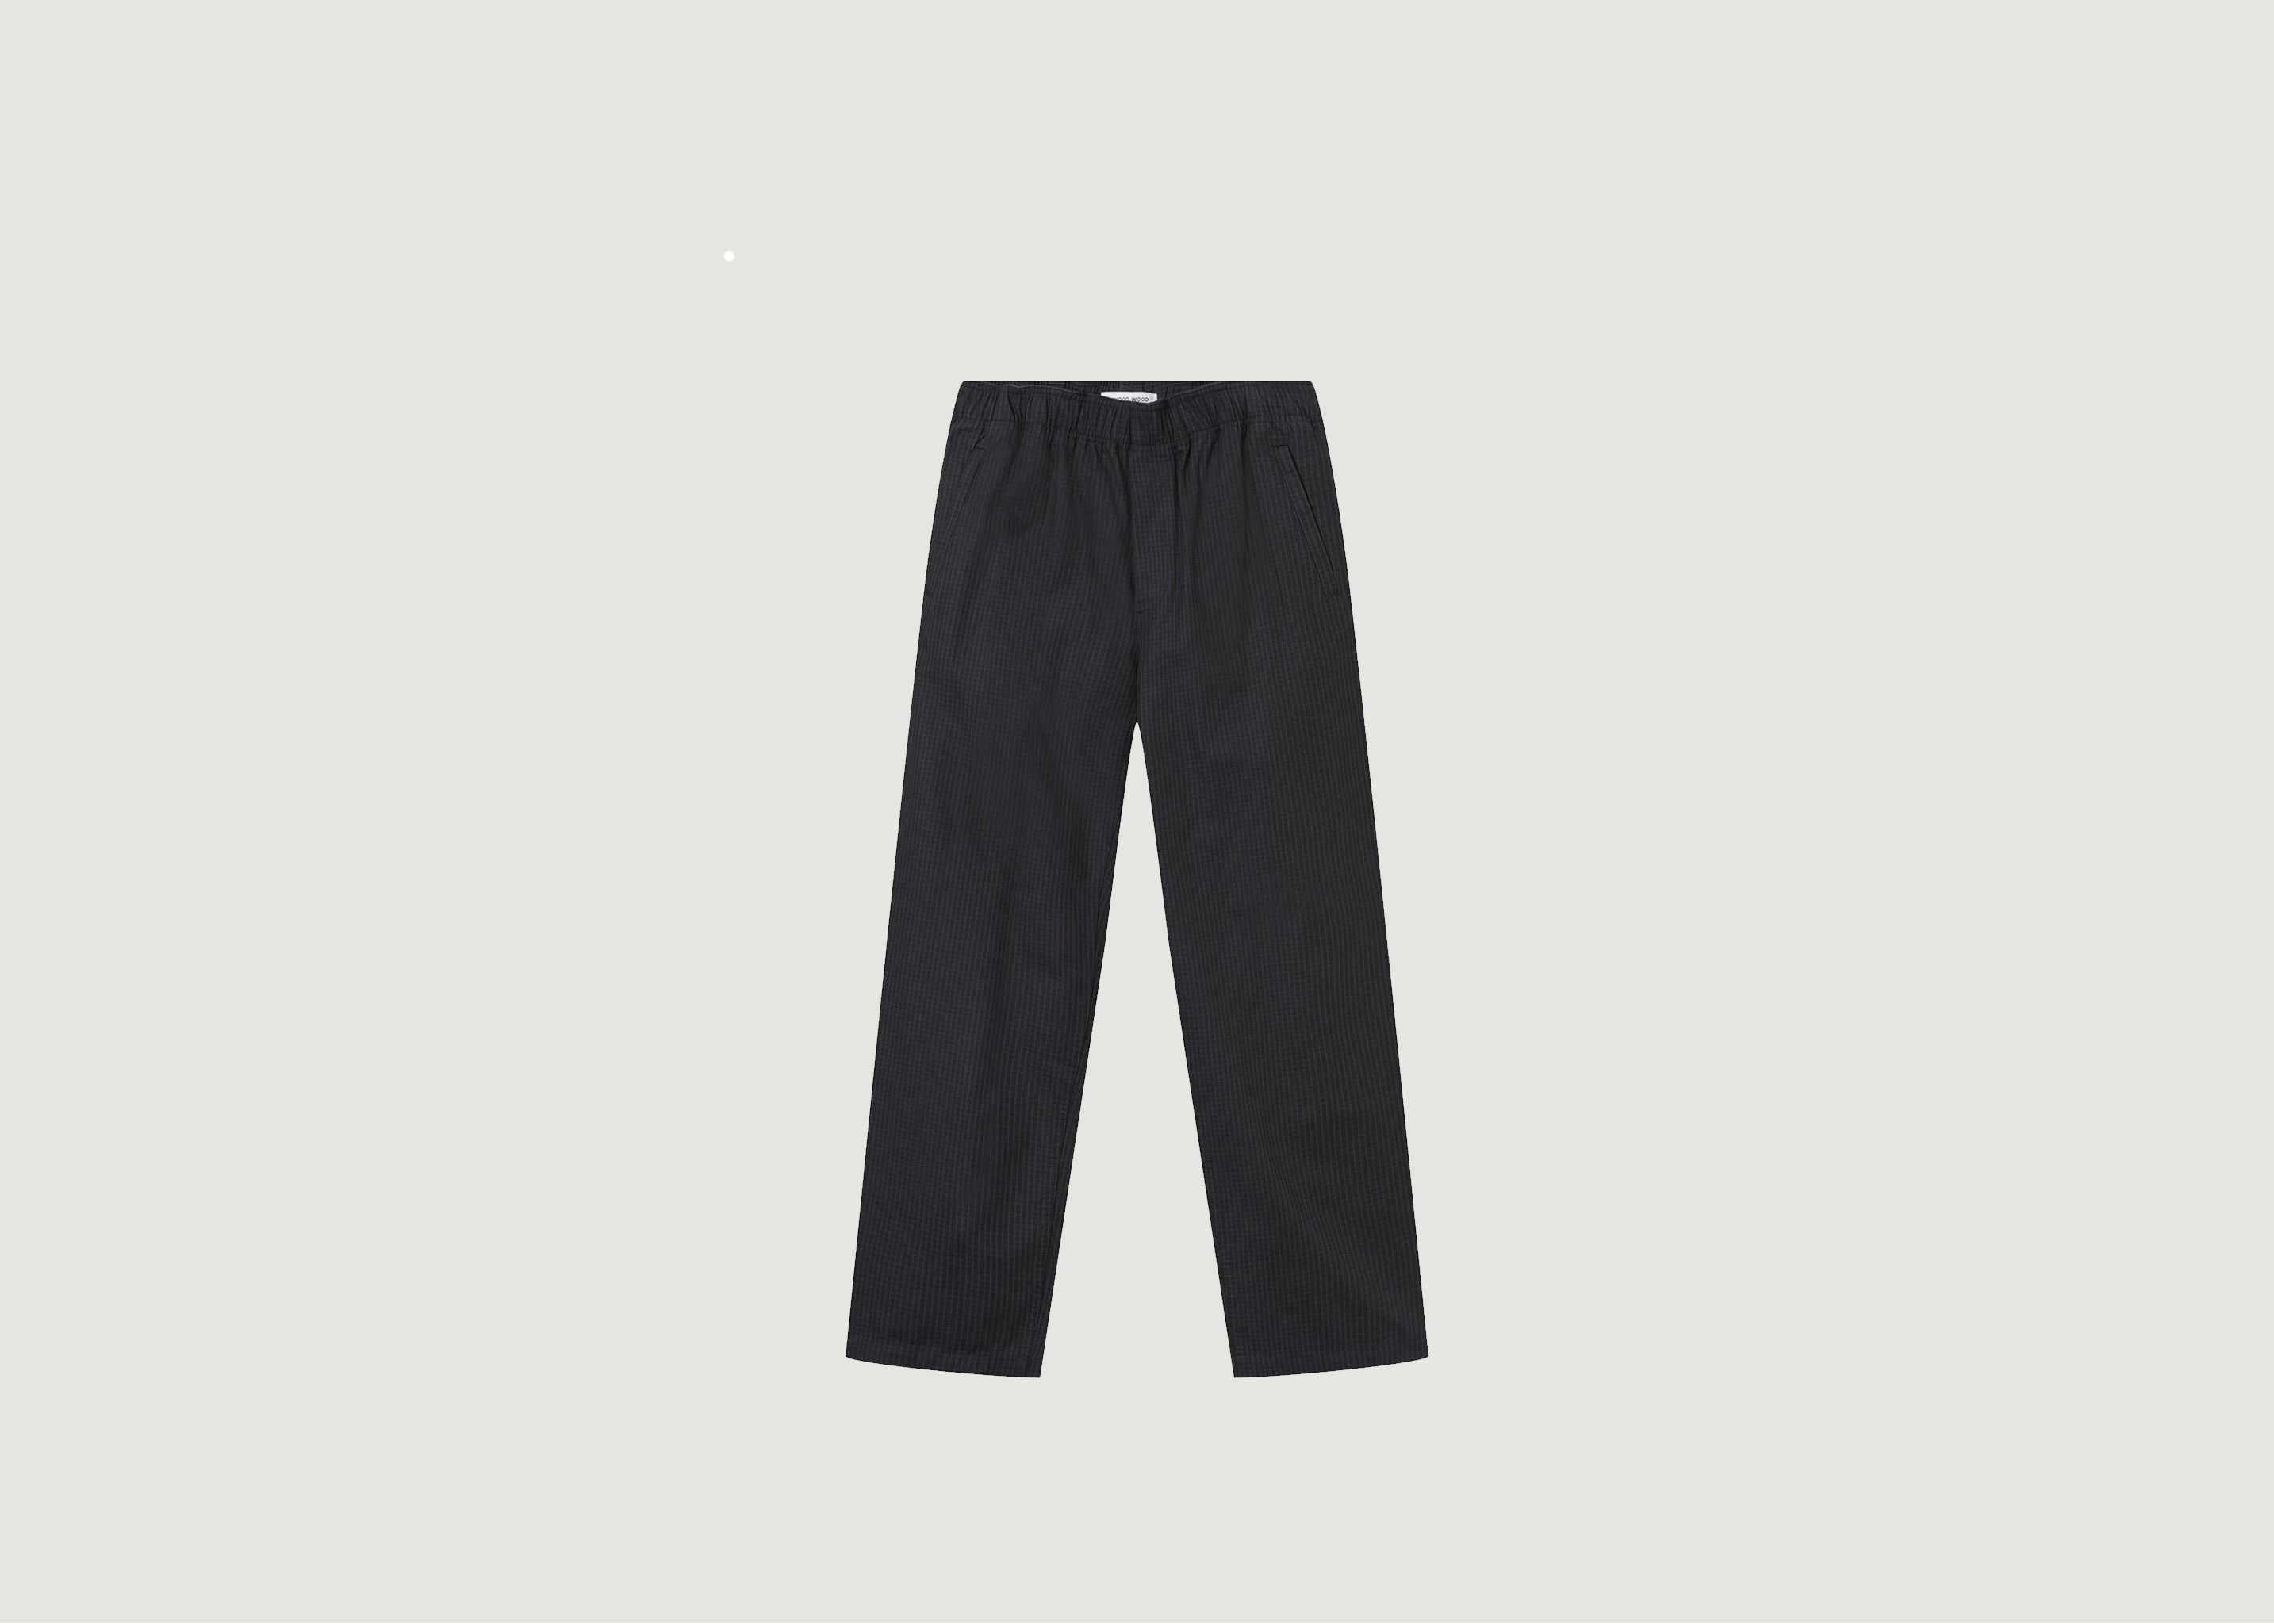 Stanley crispy check trousers - Wood Wood